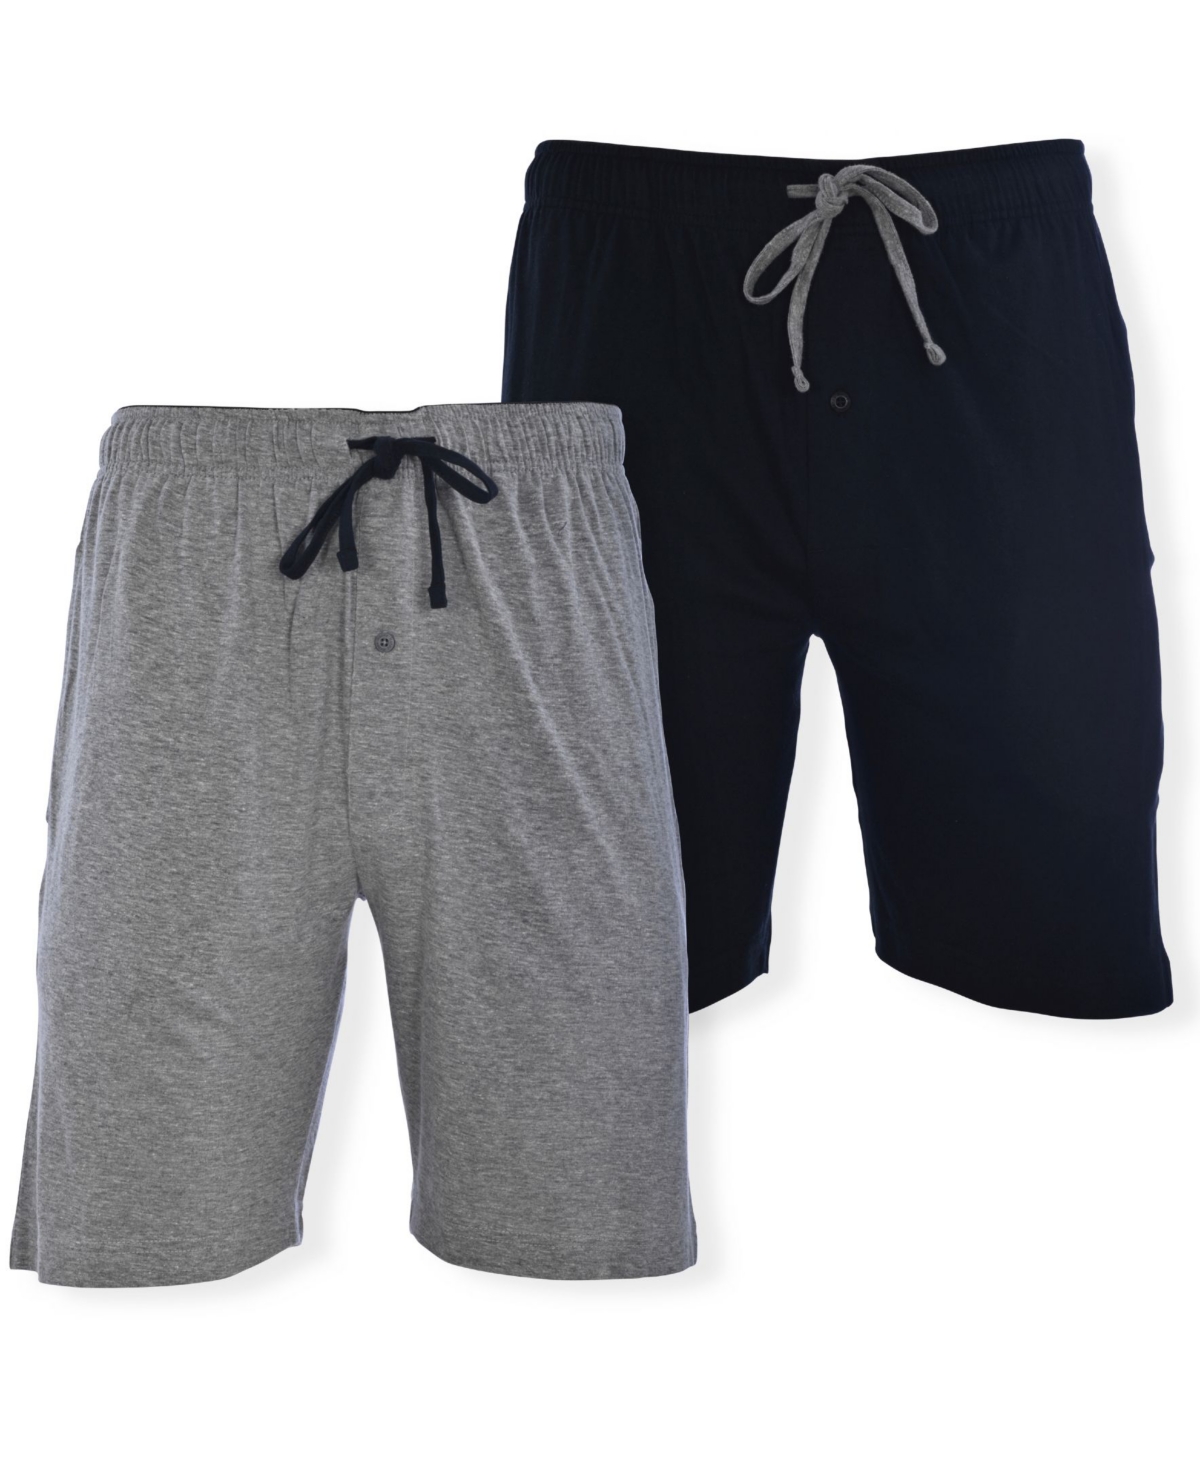 Hanes Men's Big And Tall Knit Jam Shorts, Pack Of 2 In Black,gray